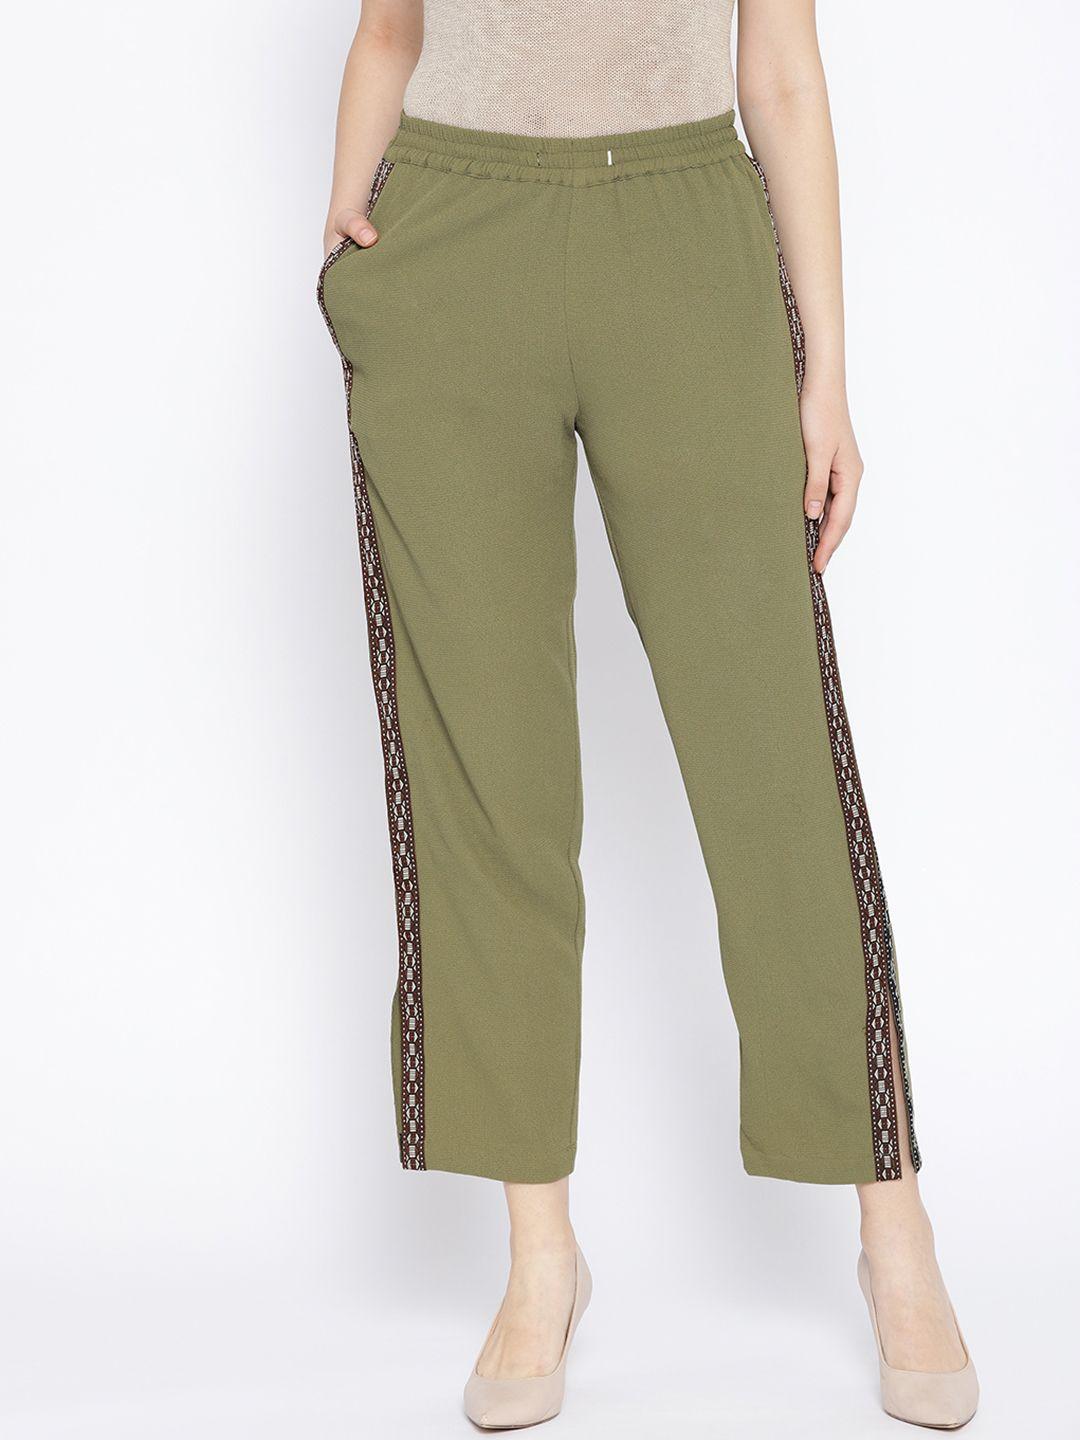 dodo & moa women olive green solid cropped regular trousers